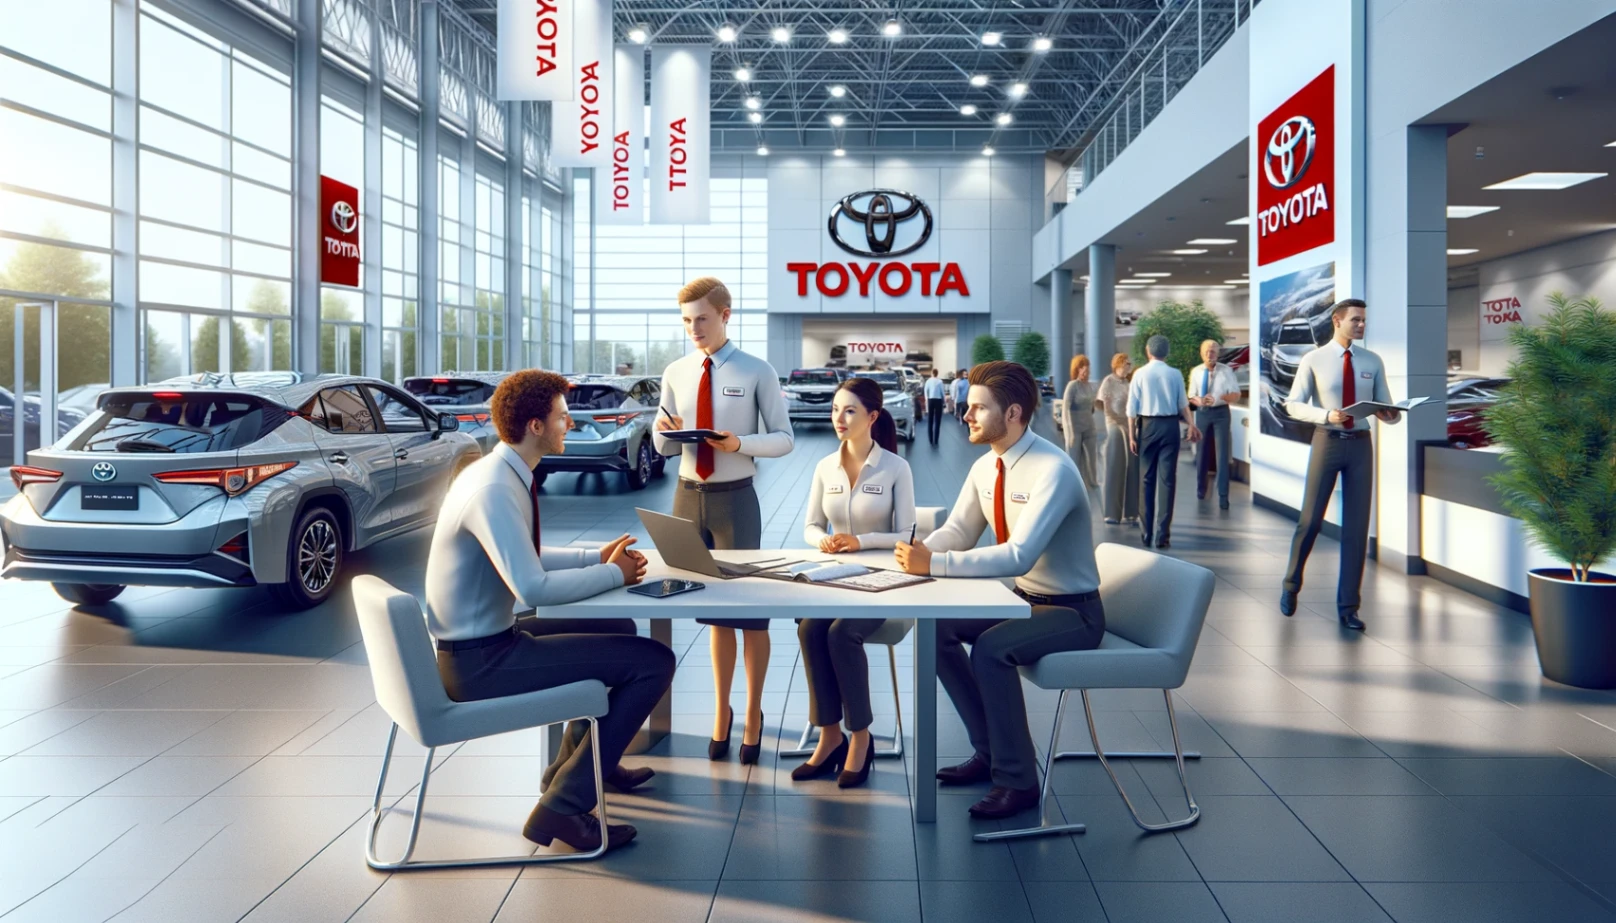 Jobs at Toyota: Learn How to Apply